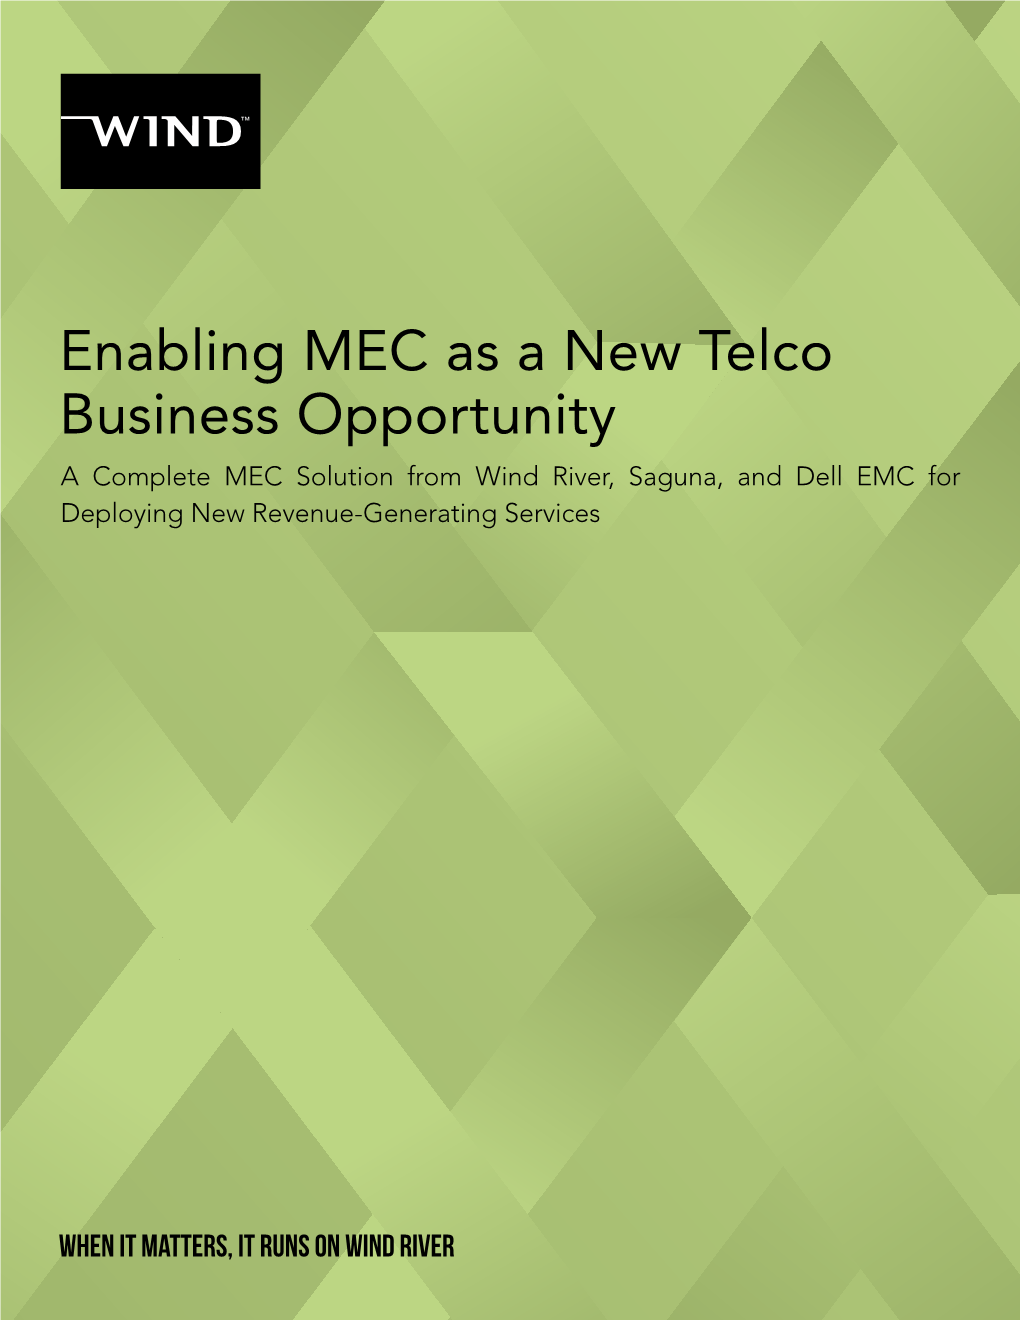 Enabling MEC As a New Telco Business Opportunity a Complete MEC Solution from Wind River, Saguna, and Dell EMC for Deploying New Revenue-Generating Services